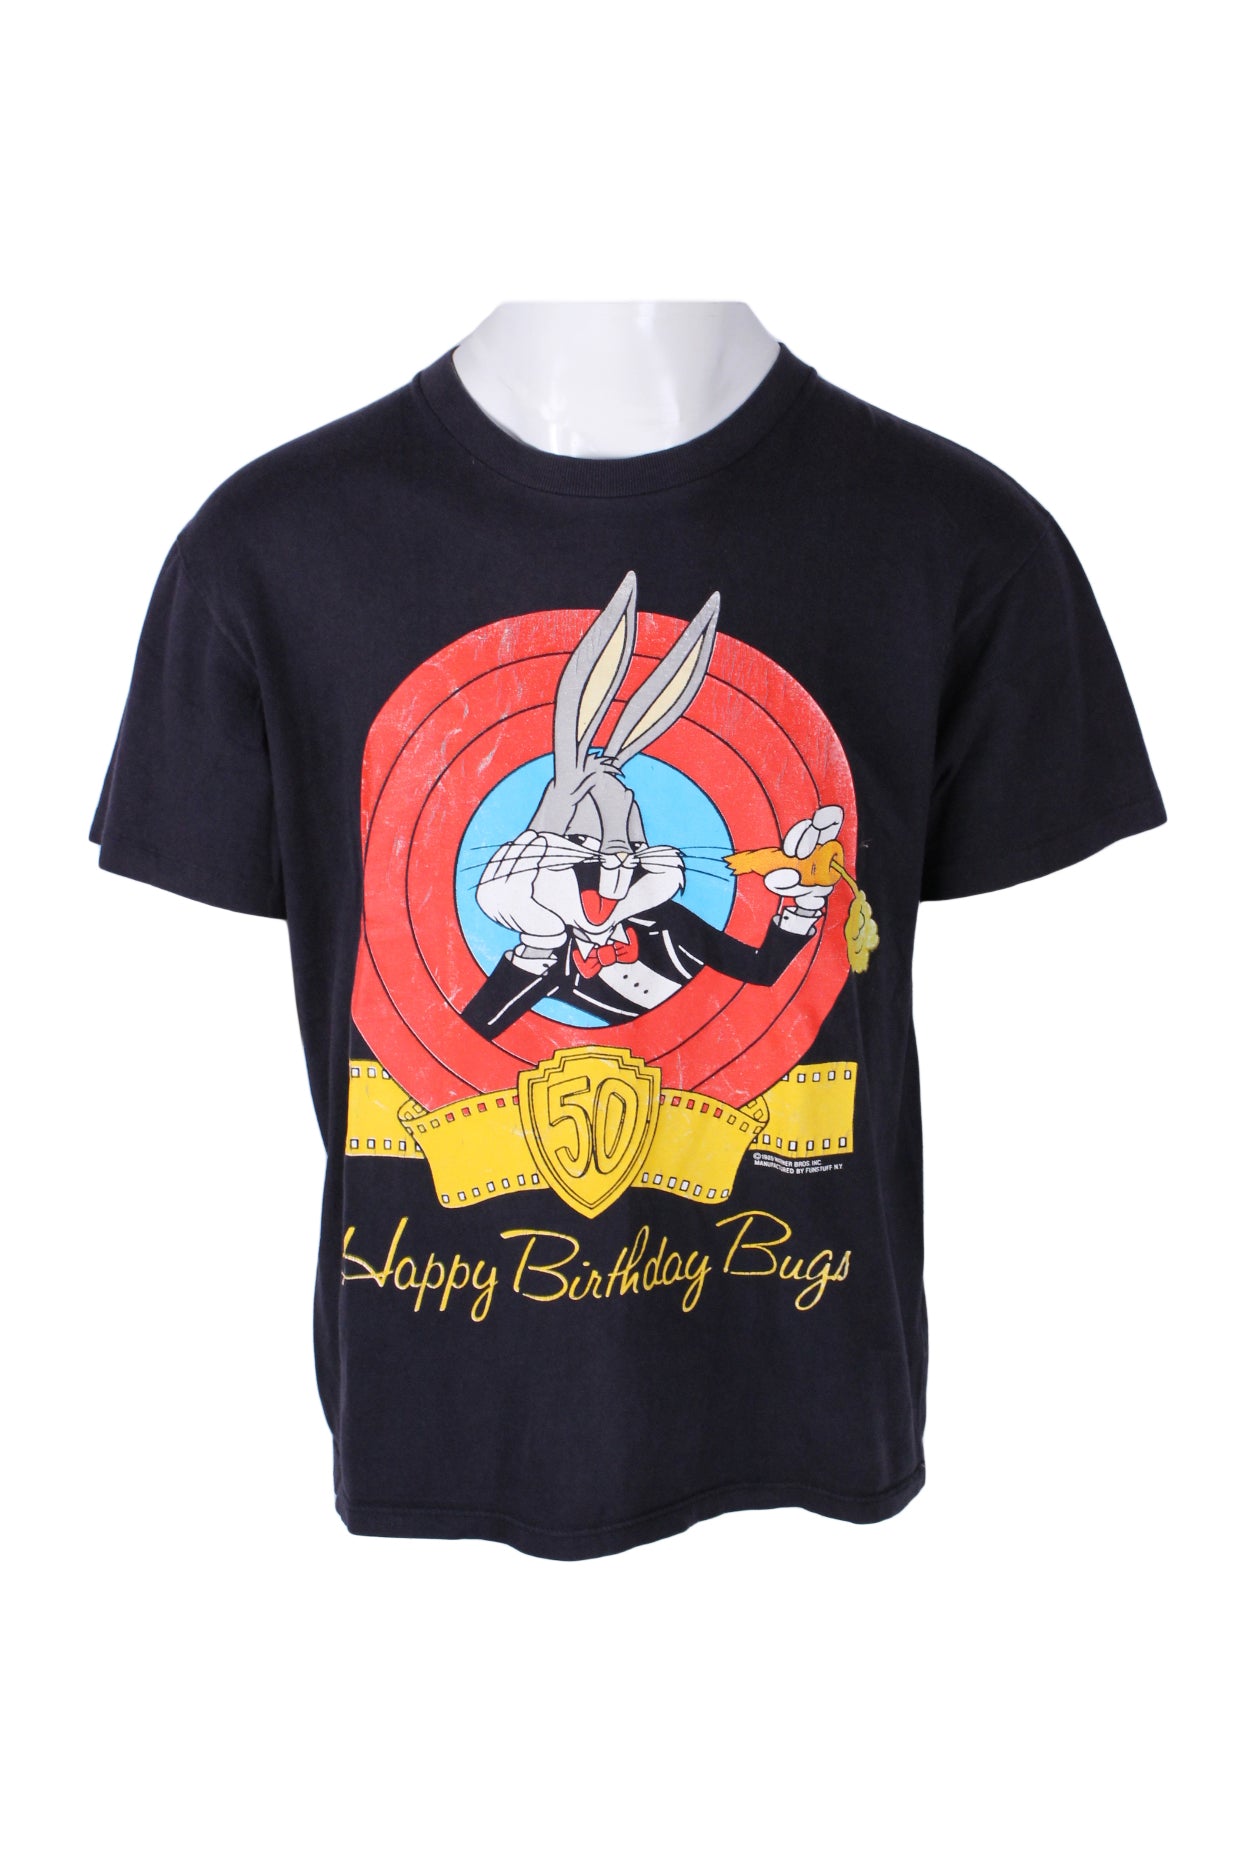 short sleeve black t-shirt with an oversized graphic of the bugs bunny character across the chest with ‘happy birthday bugs’ written across the bottom